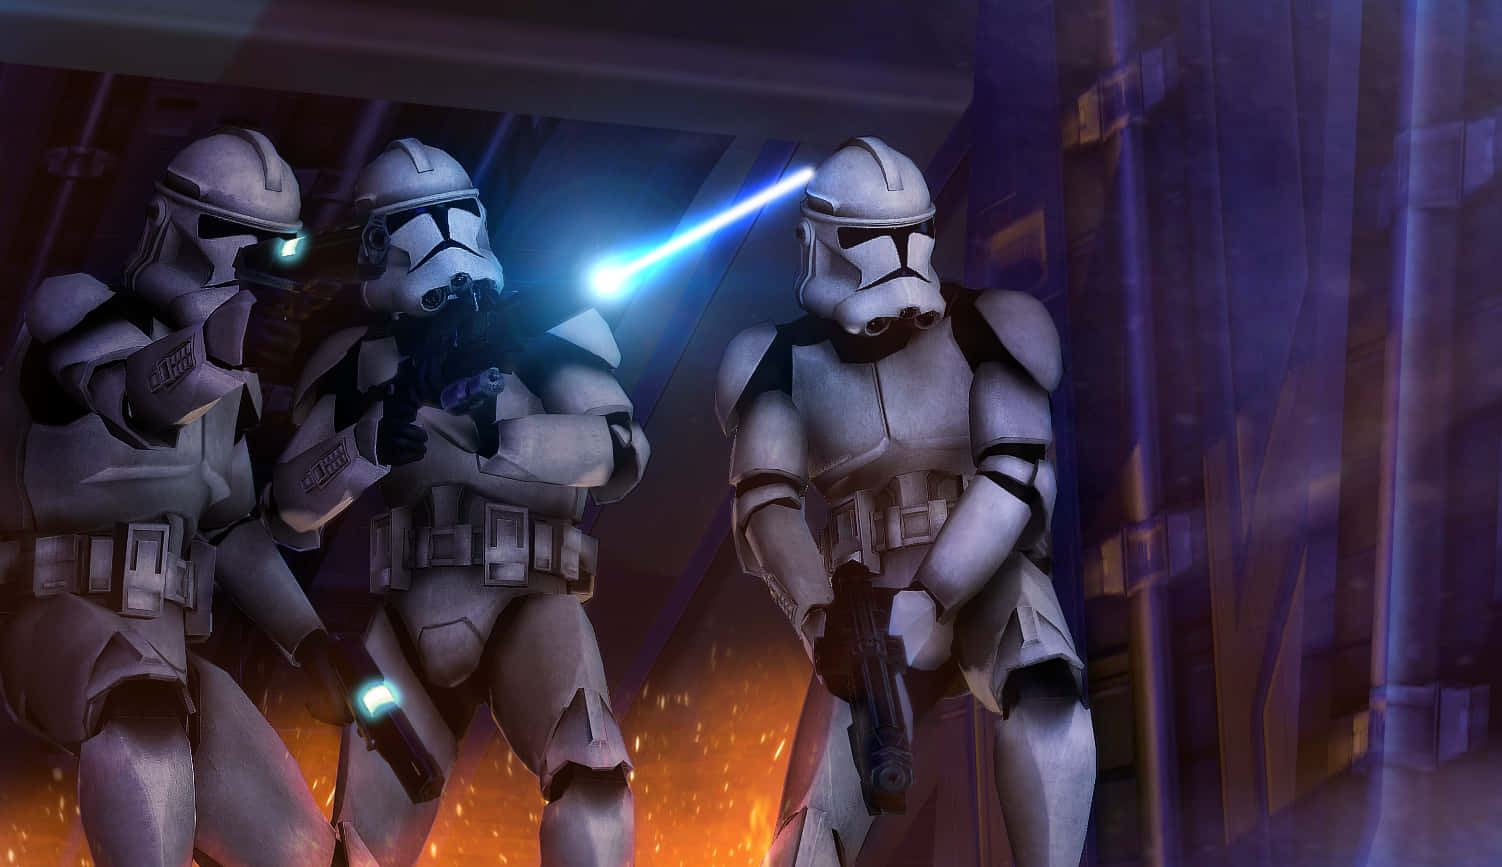 Jedi Knights Defend The Republic Against The Separatists In The Clone Wars.